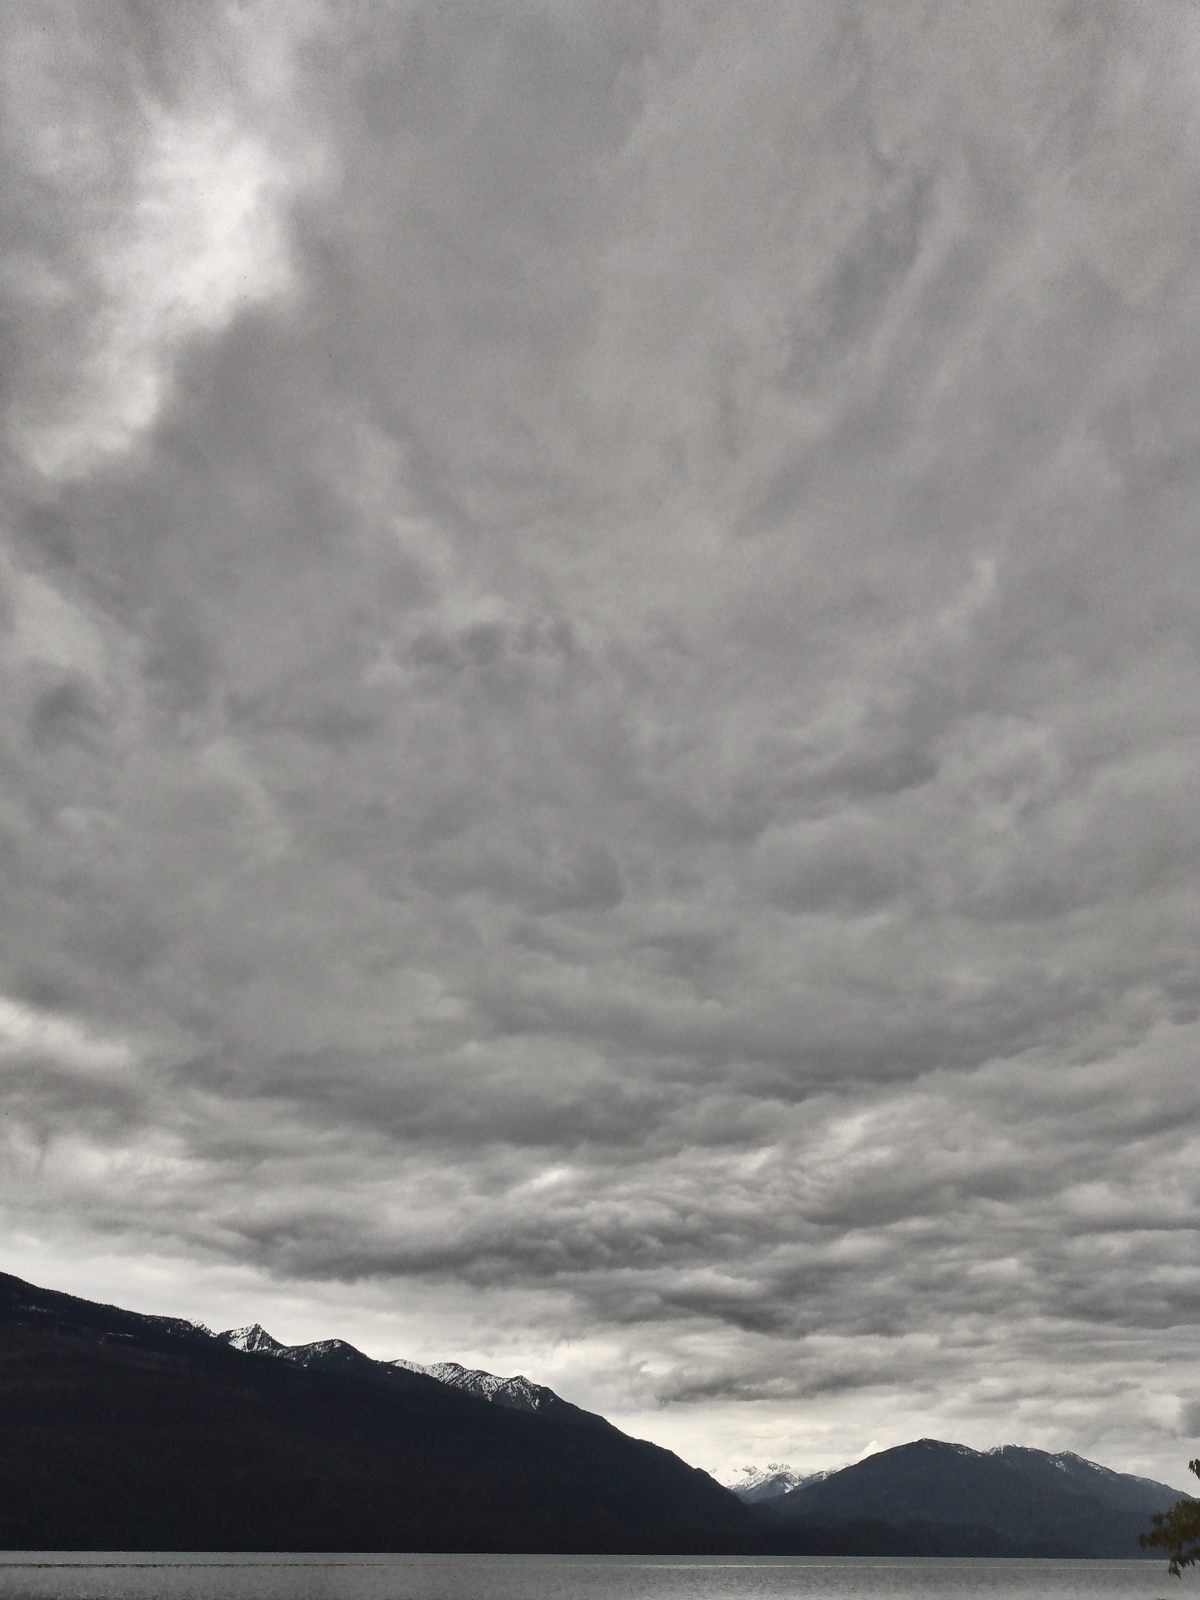 Beautiful gray pattern emerges in the sky